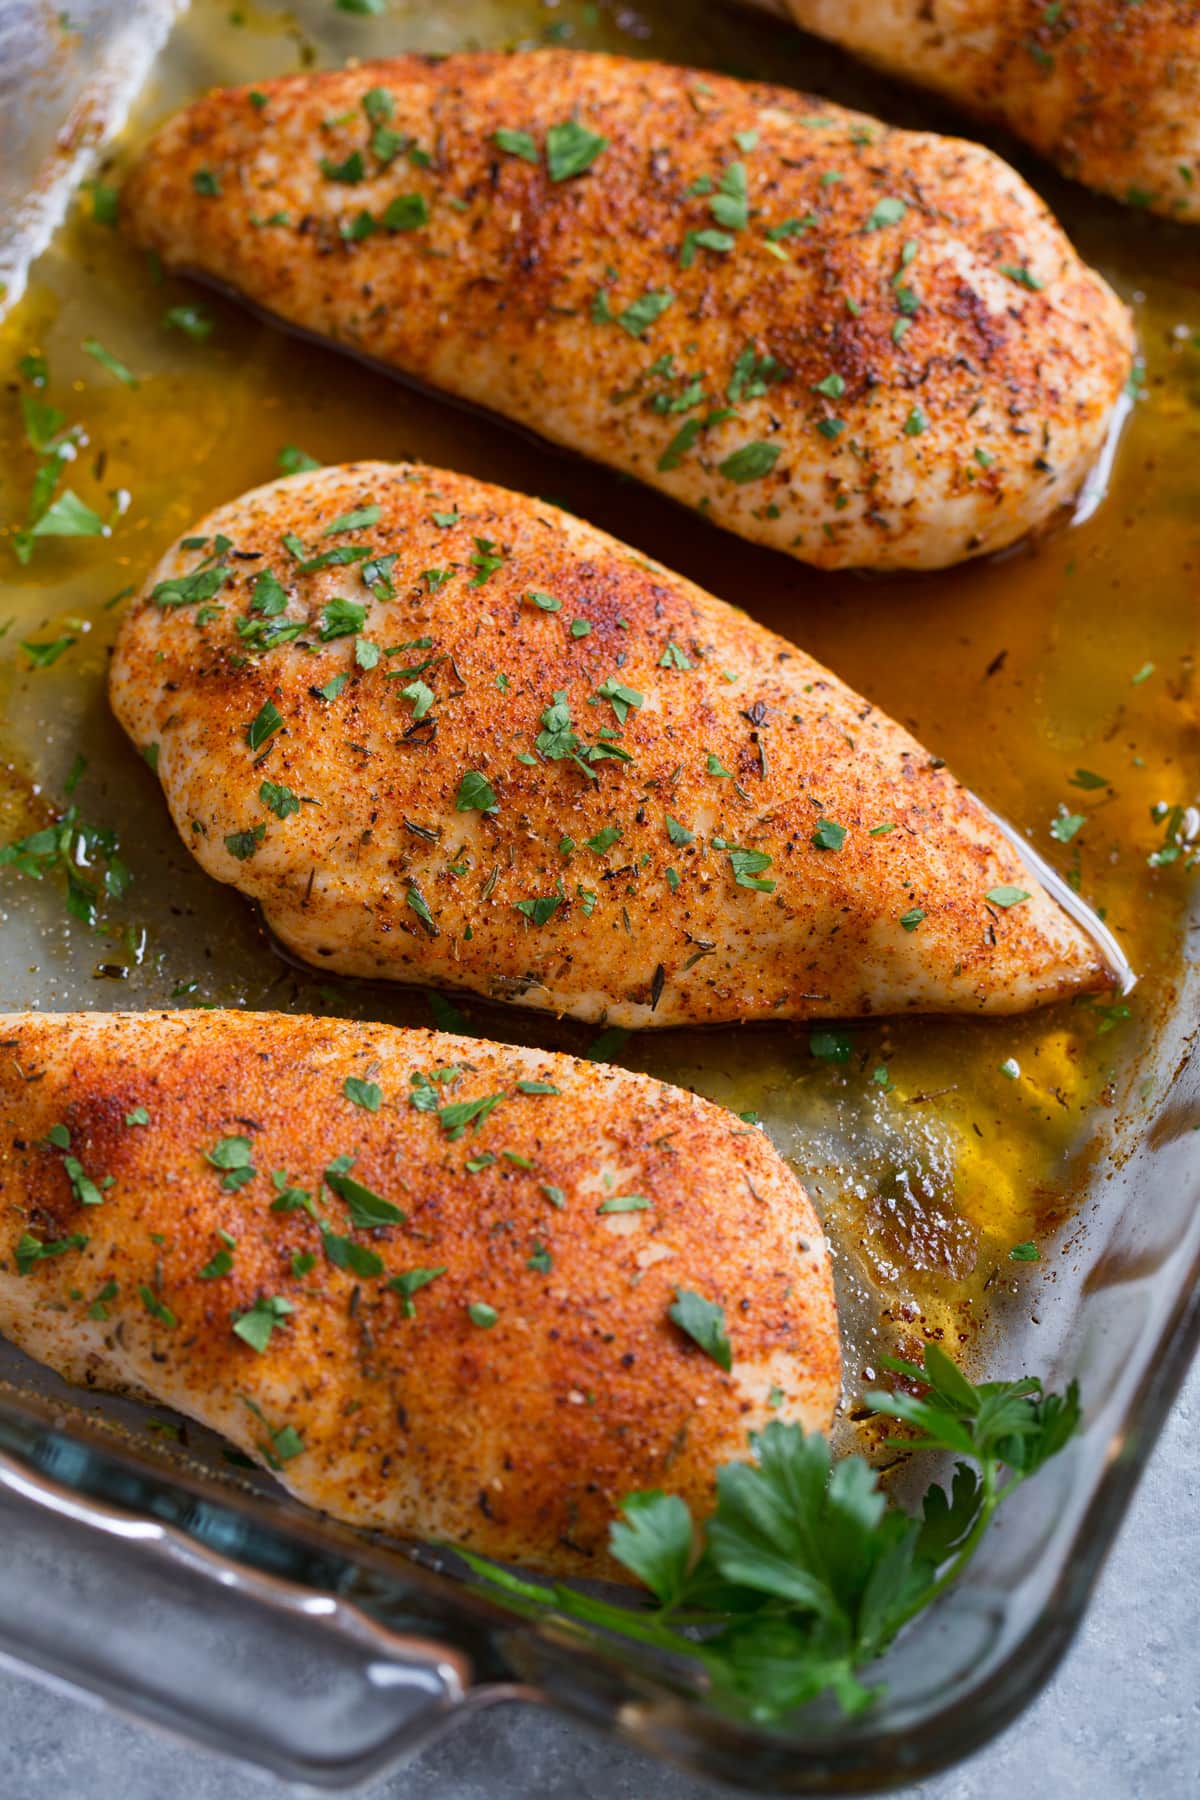 Baked Chicken Breast Easy Flavorful Recipe Cooking Classy,How To Grow Sweet Potatoes From Tubers